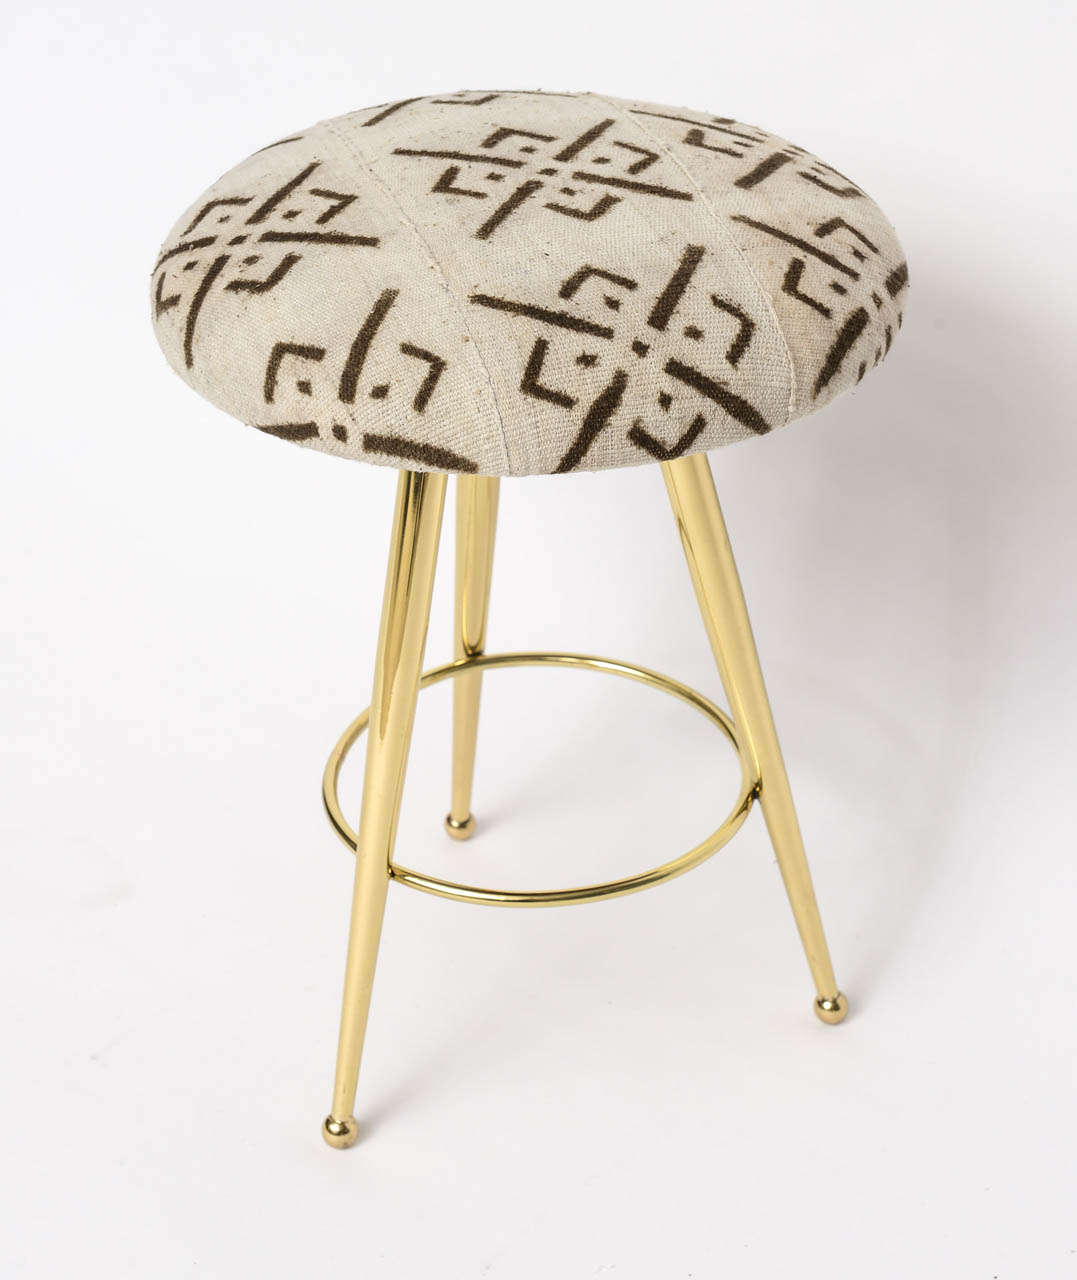 We love the contrast of the graphic, textured African mud cloth upholstery with the polished brass sophistication of this diminutive pair of 50's Italian stools.